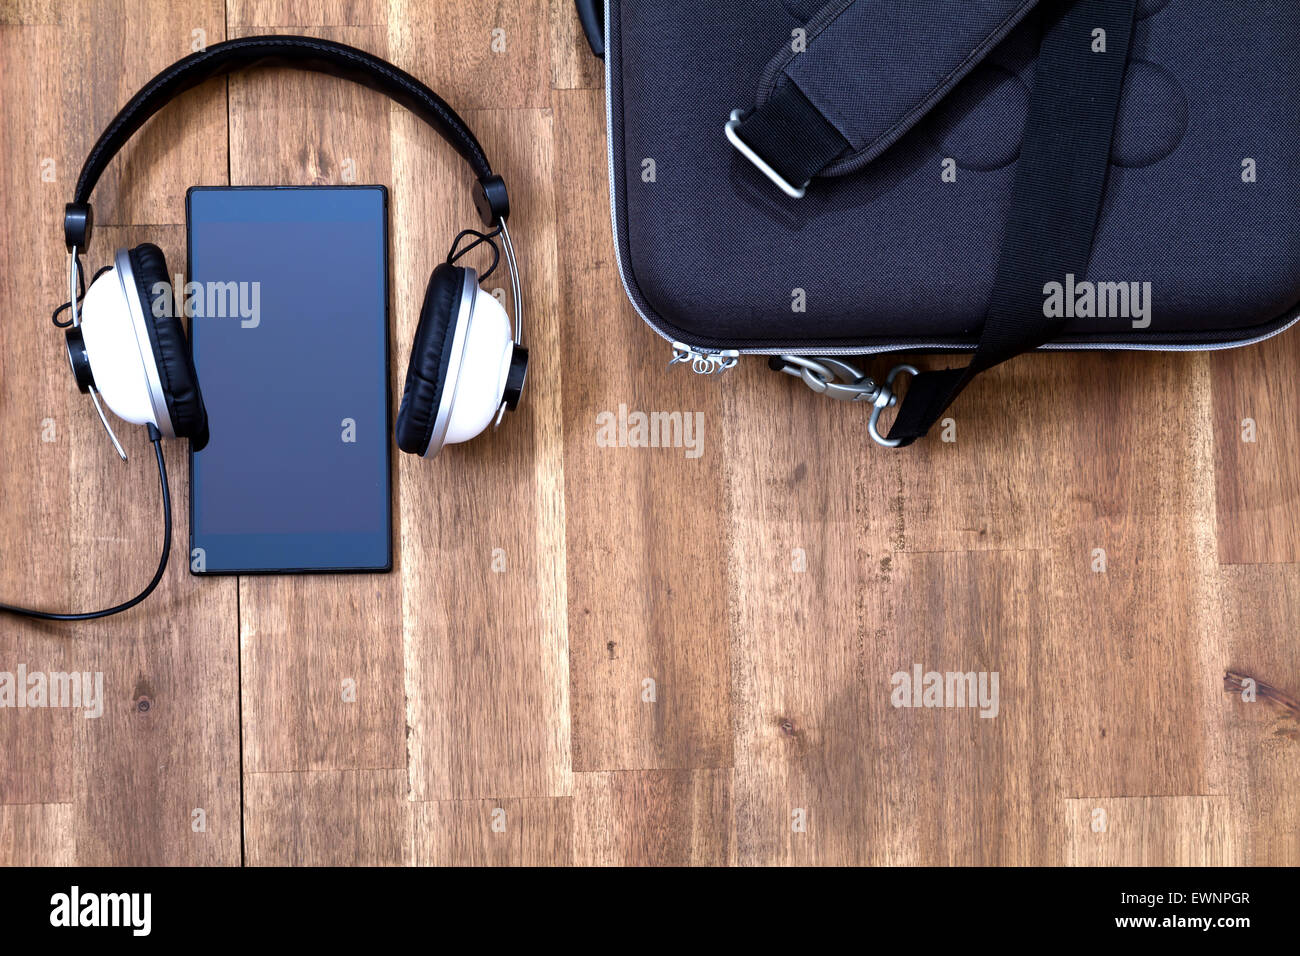 Cellphone with headphone and a briefcase background Stock Photo